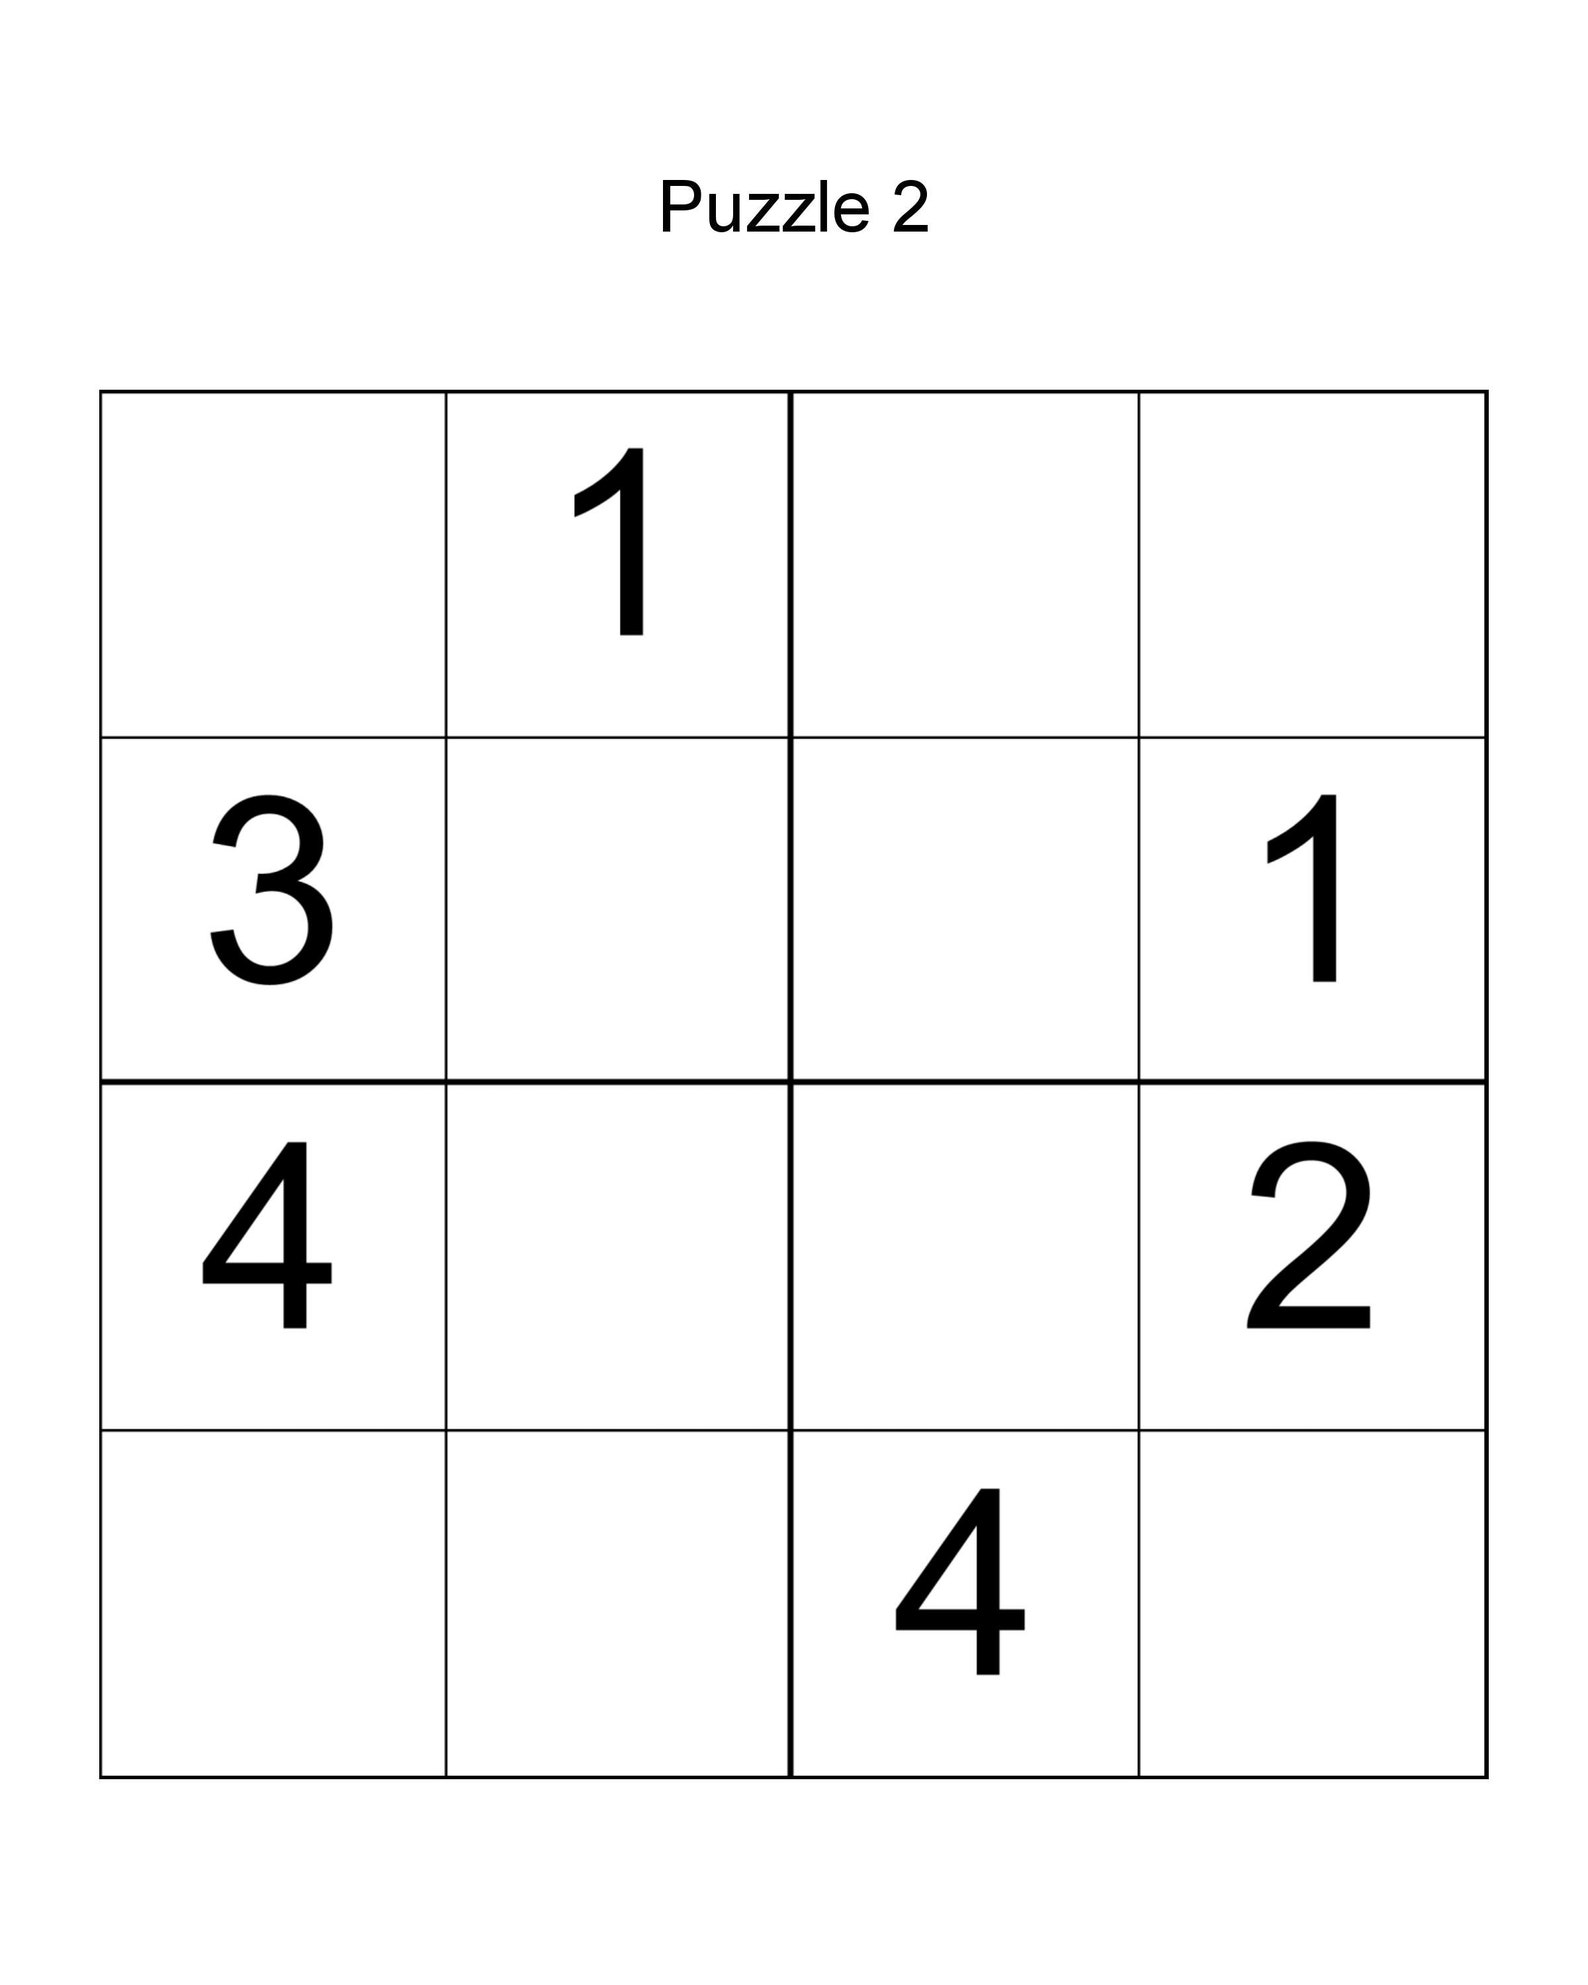 sudoku for kids or beginners easy 4x4 sudoku 100 puzzles